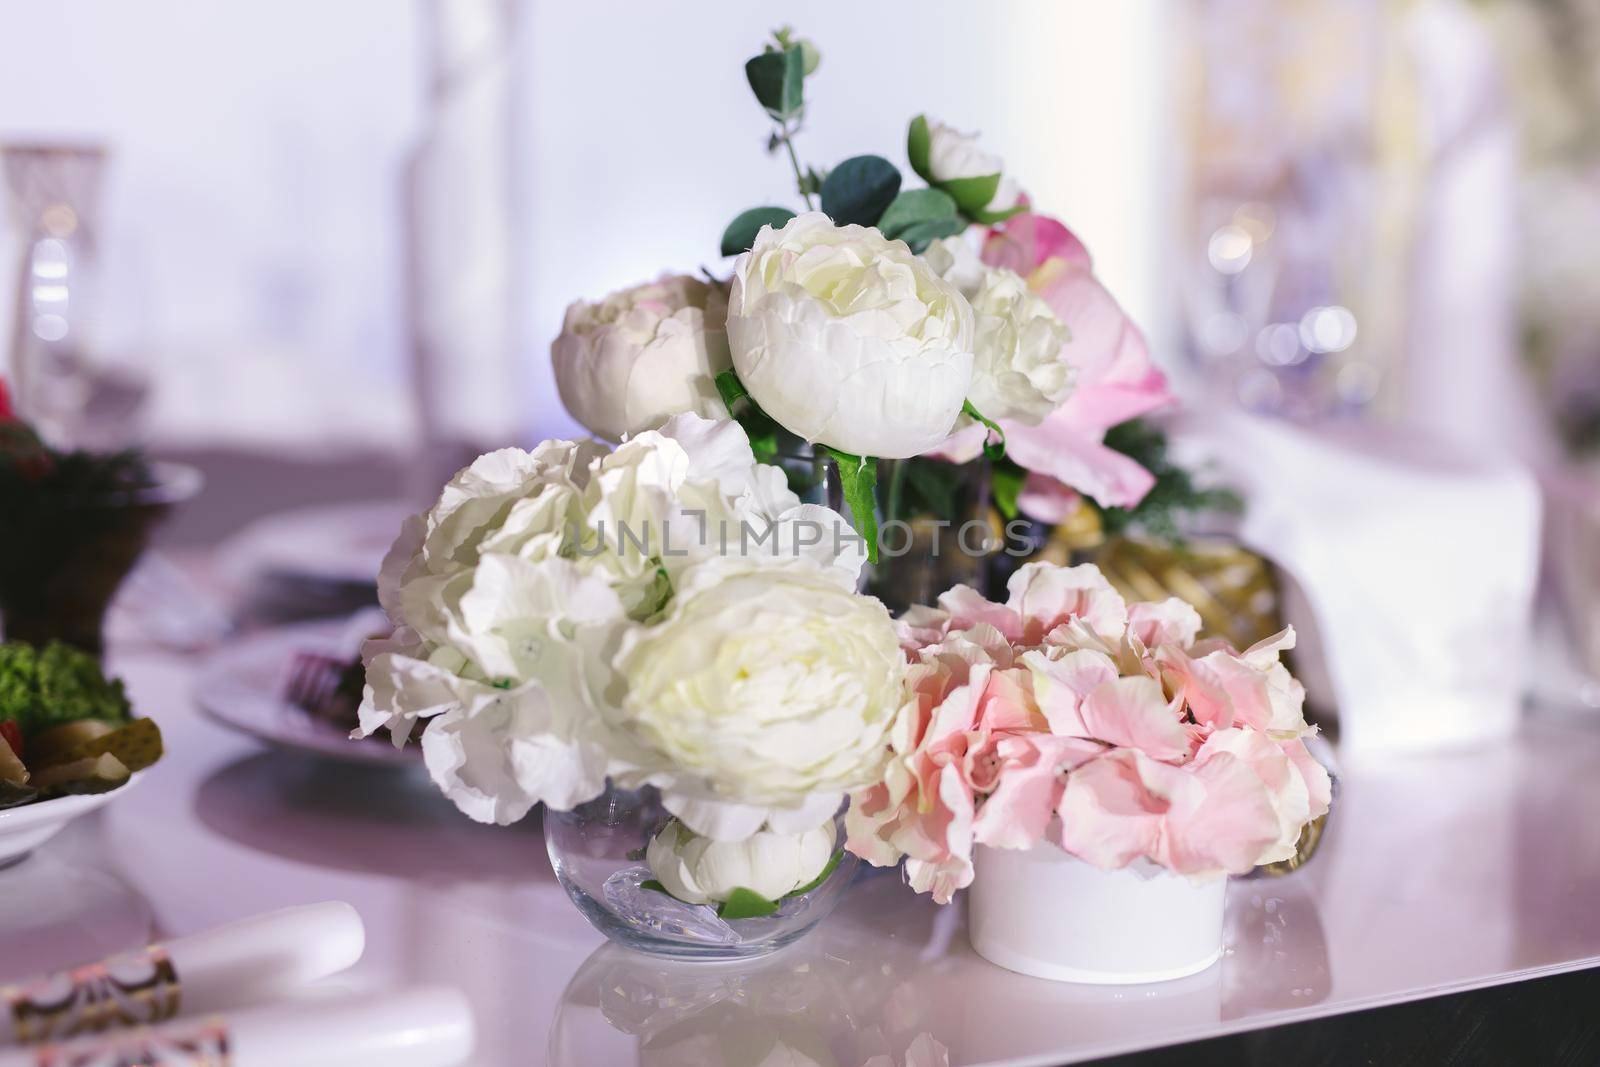 Table setting at a luxury wedding reception. Beautiful flowers on the table.